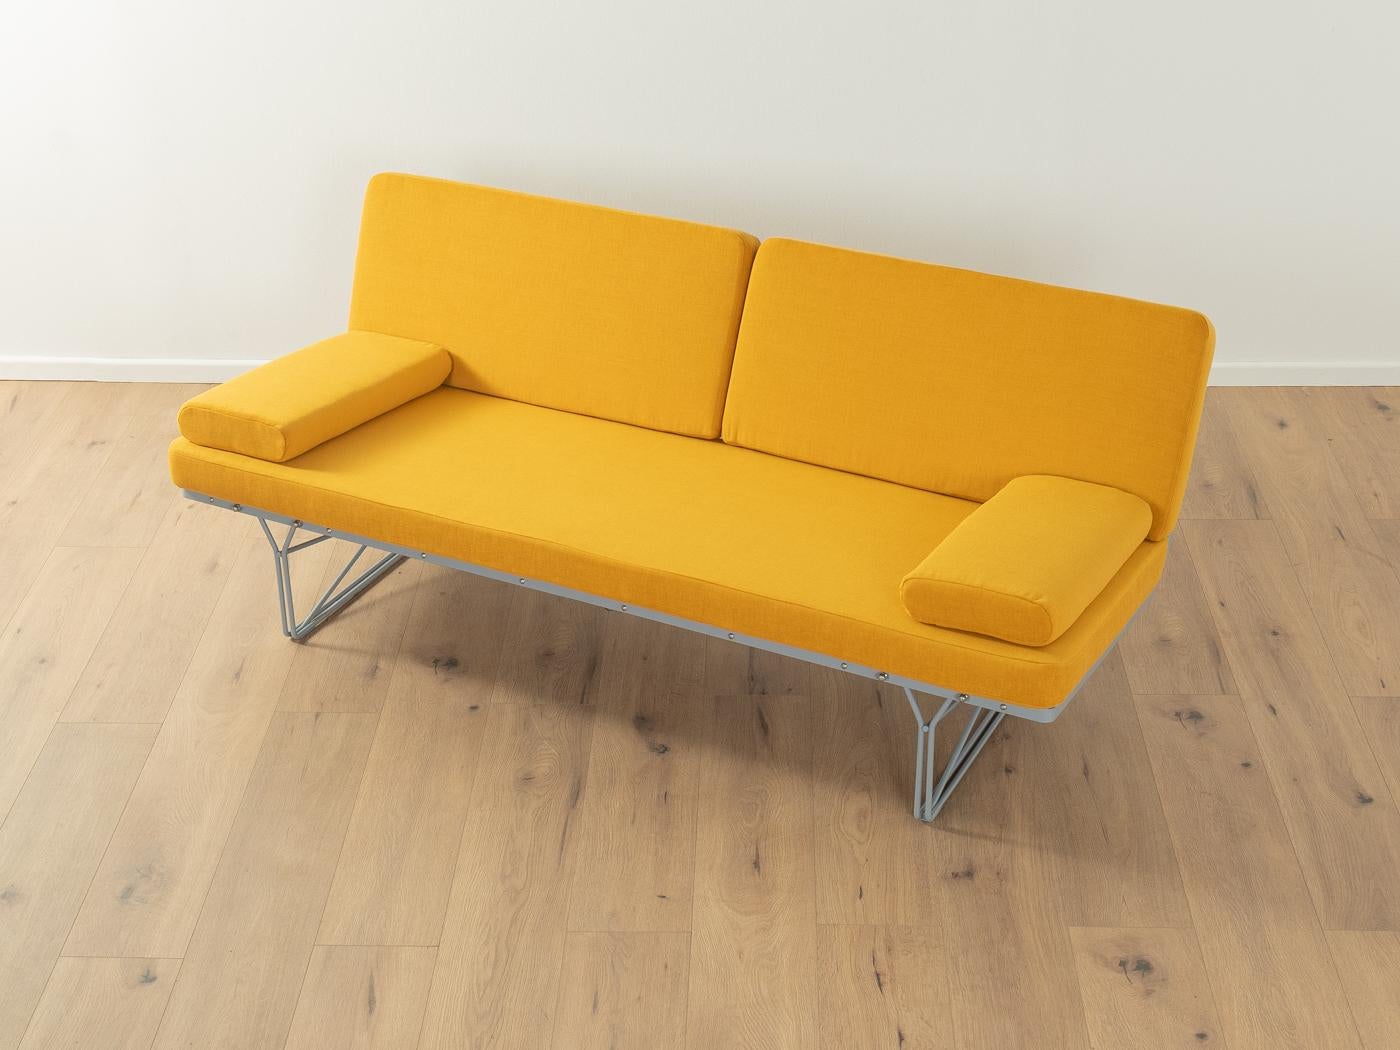 Filigree Moment Sofa by Niels Gammelgaard for Ikea from the 1980s with a grey lacquered steel frame. The sofa has been reupholstered and covered with a high-quality fabric in yellow.
Quality Features:

    very good workmanship
    high-quality